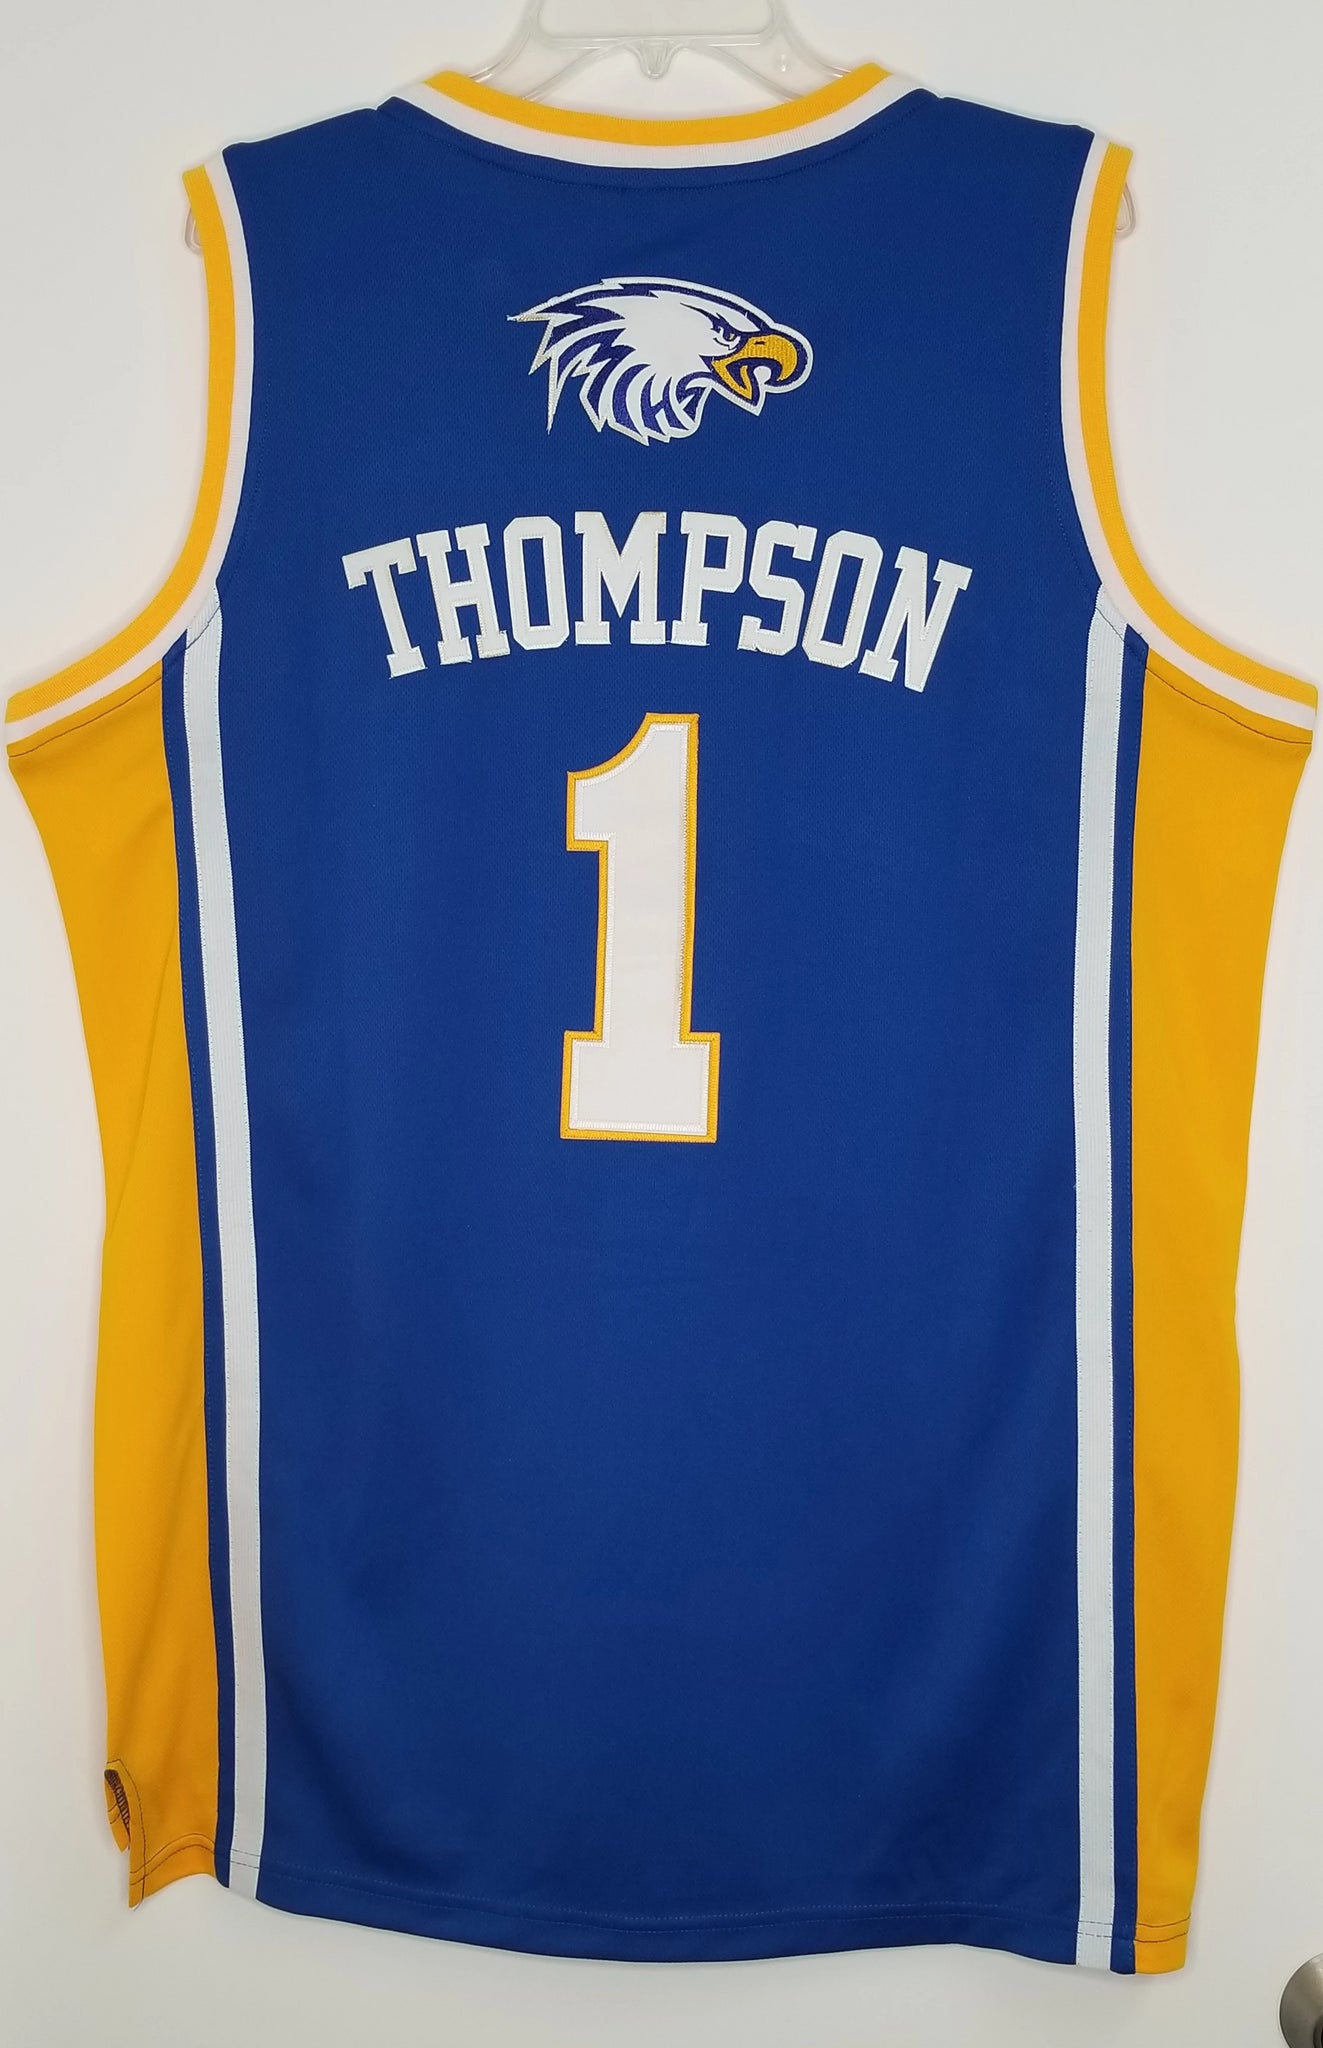 Klay Thompson Jersey Graphic T-Shirt Dress for Sale by Jayscreations